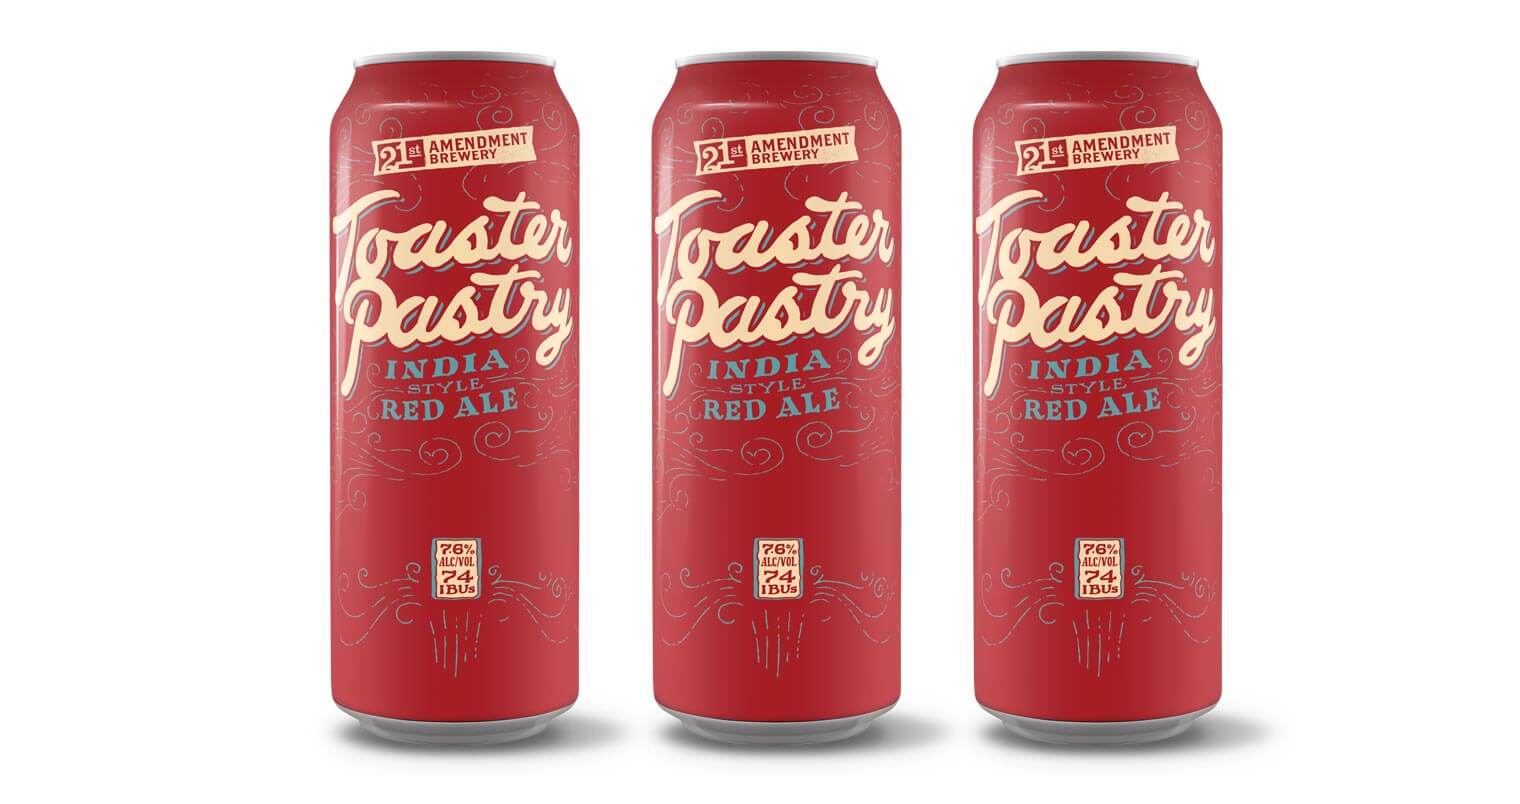 "Toaster Pastry" Indian Red Ale from 21st Amendment Brewery Unwraps